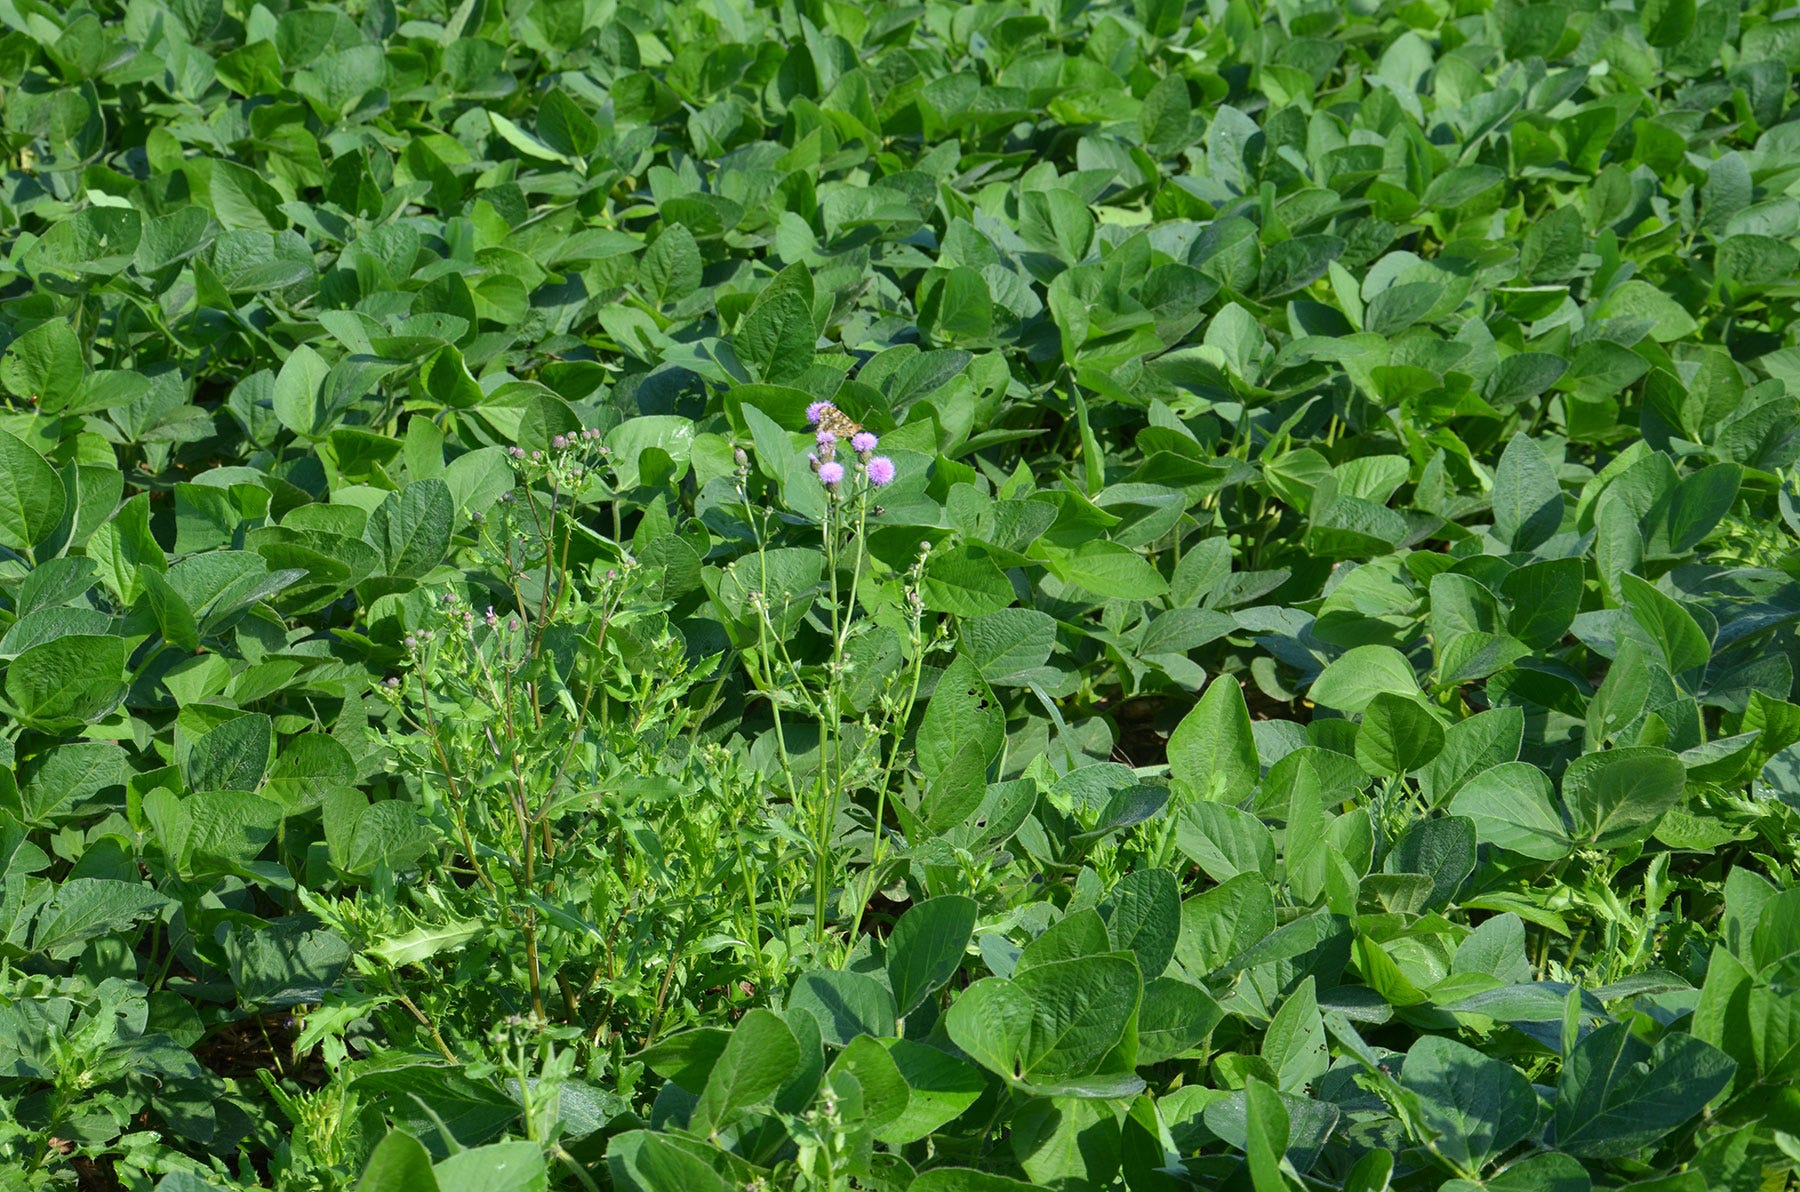 Canada thistle in a soybean field